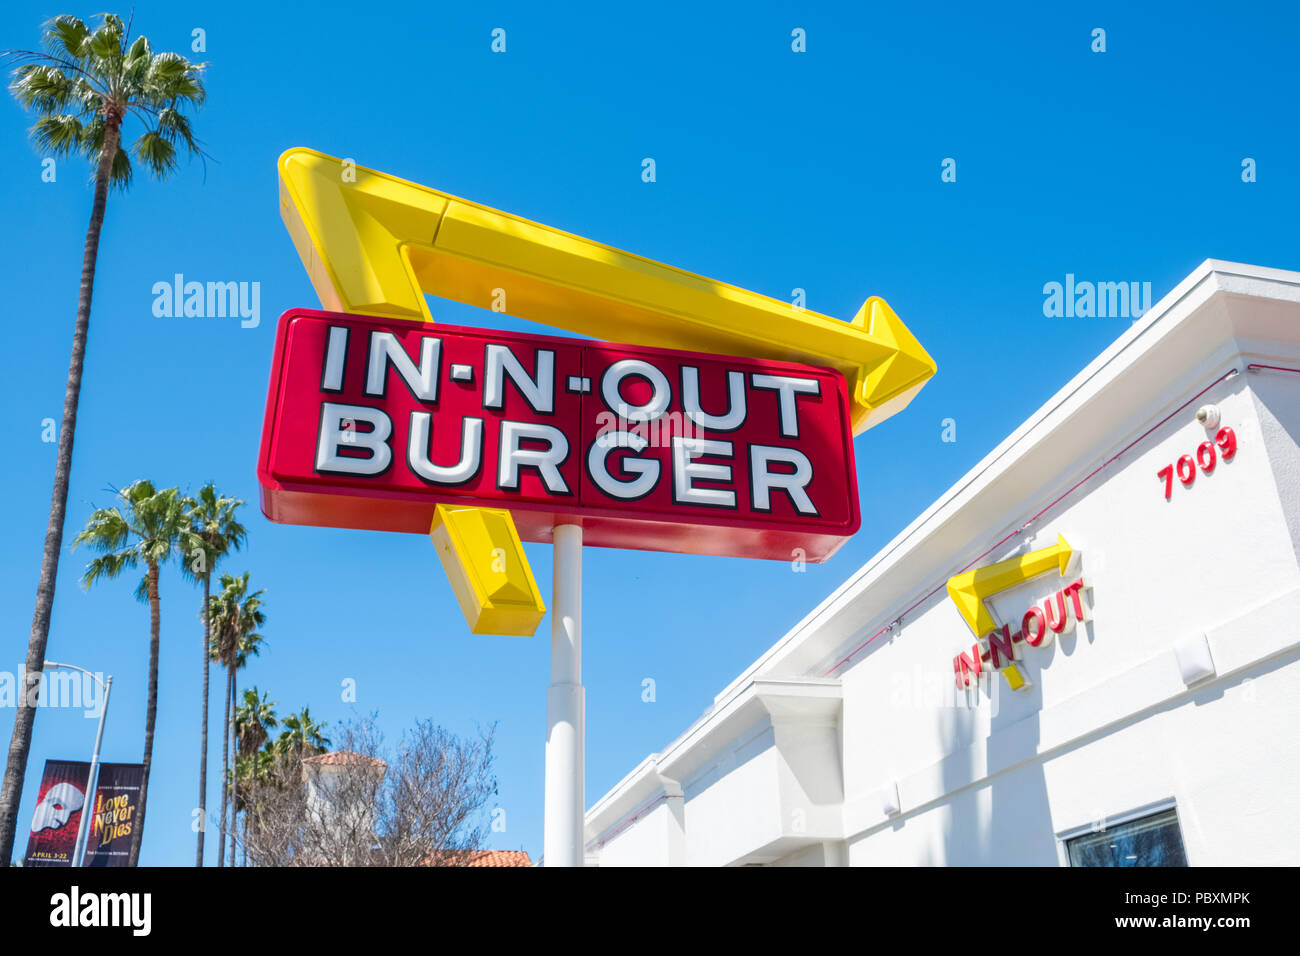 In N Out Burger fast food restaurant logo sign, Hollywood, Los Angeles, LA, California CA, USA Stock Photo